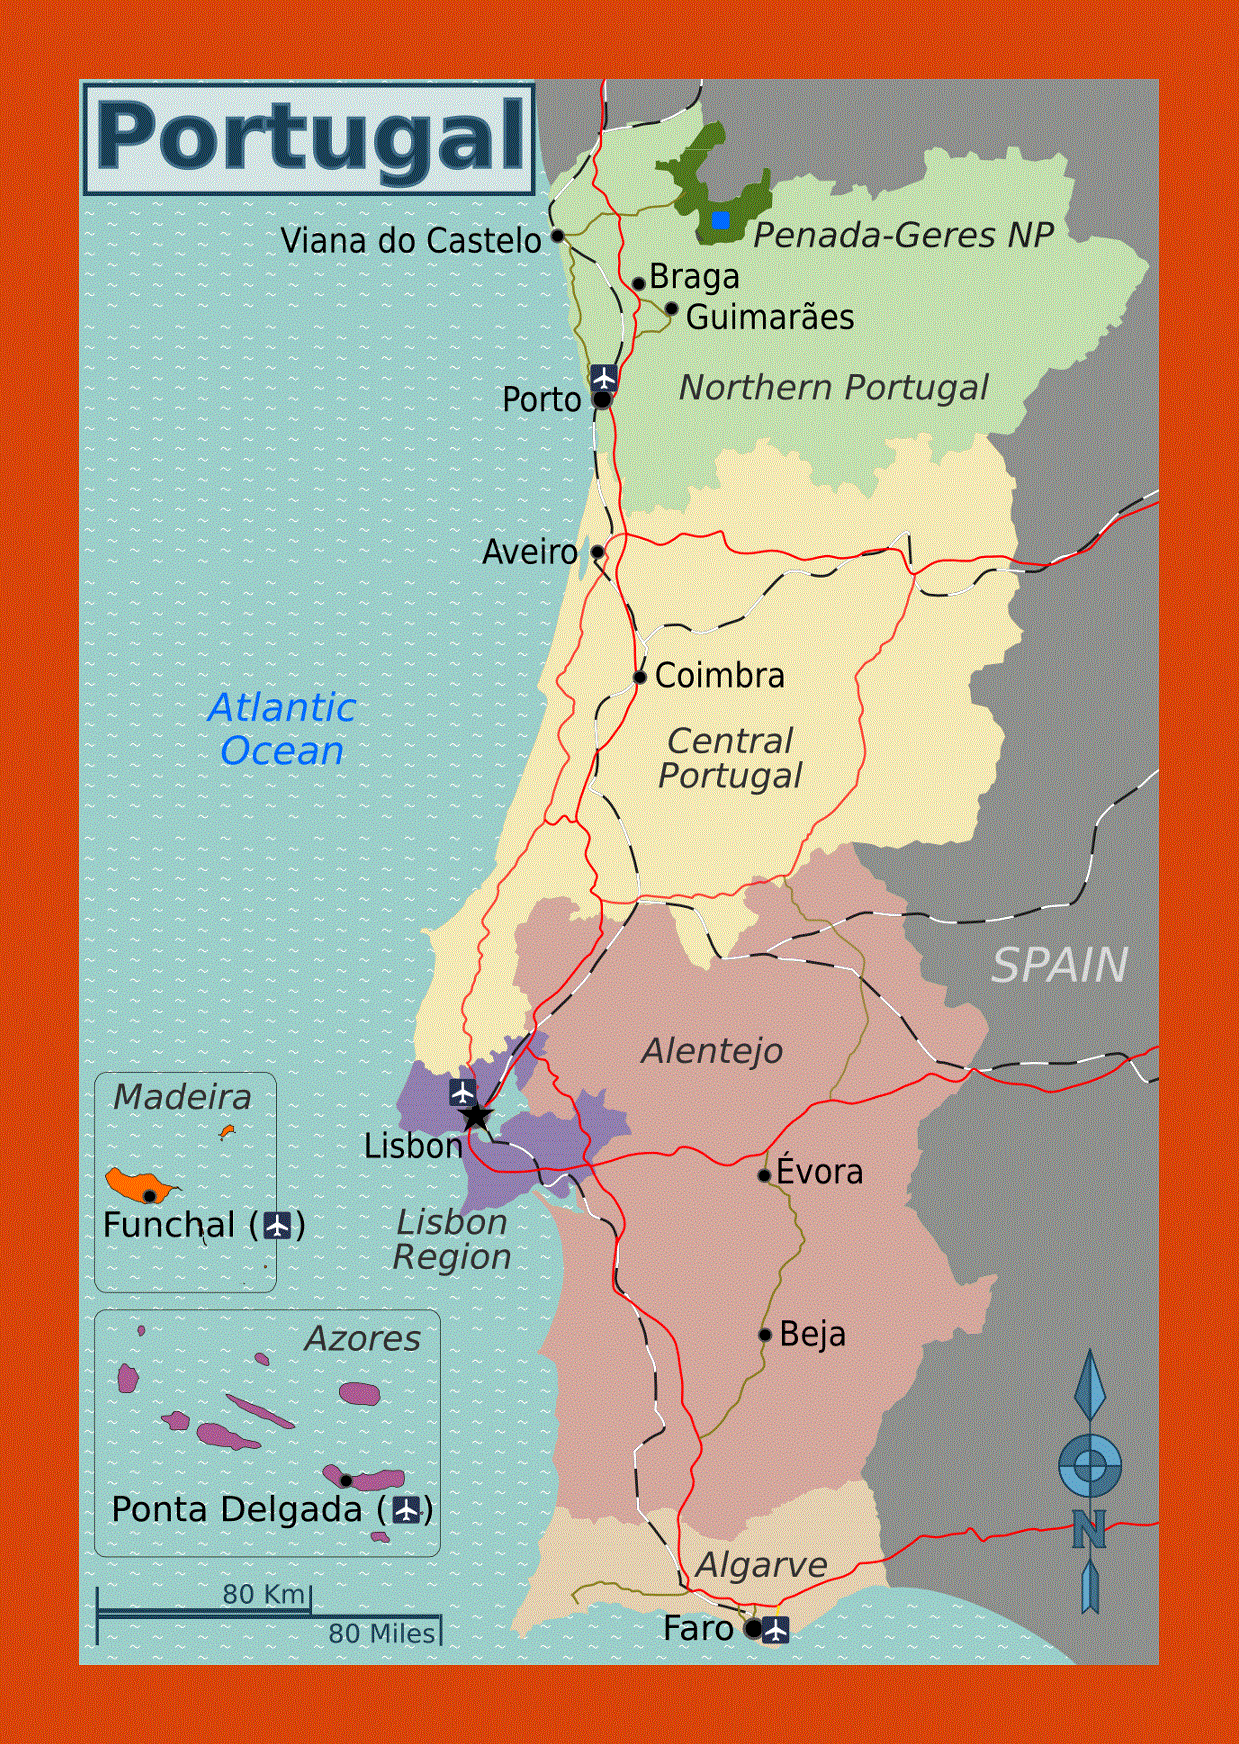 Regions map of Portugal